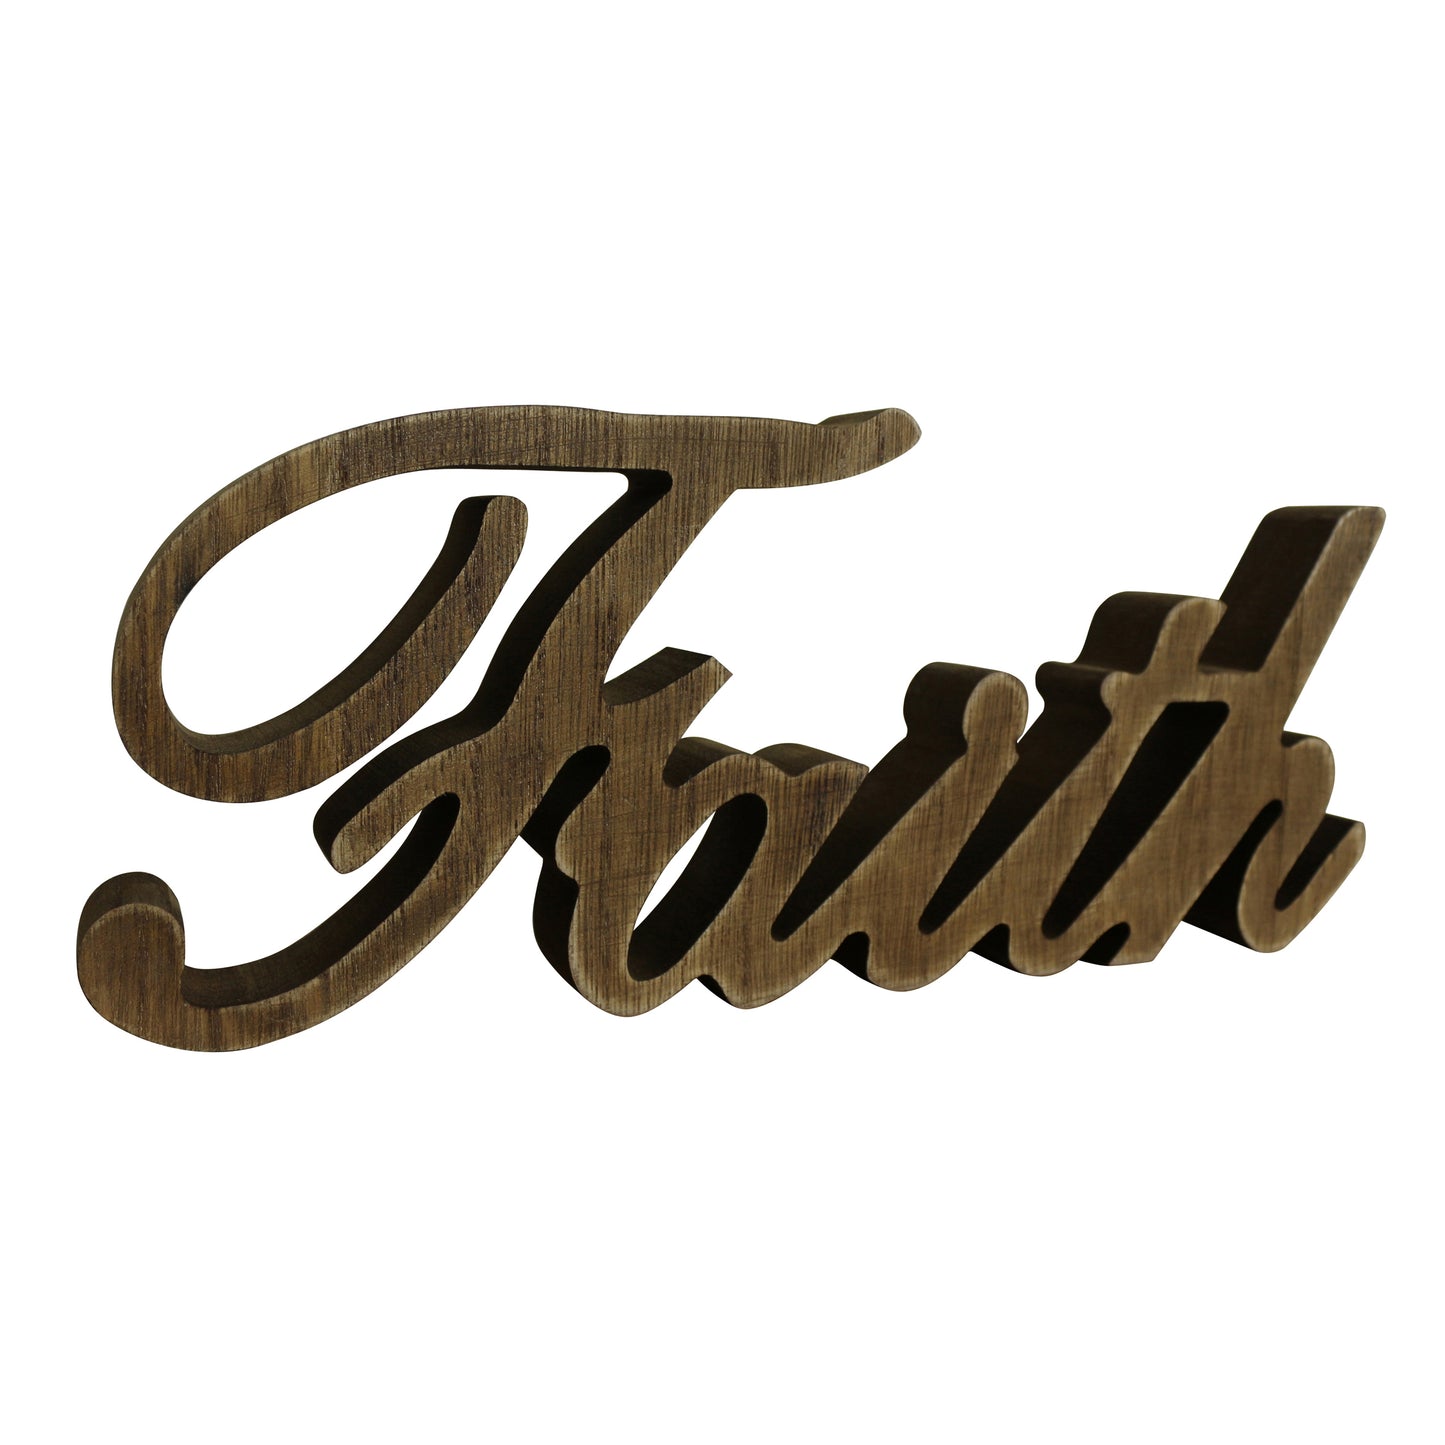 CVHOMEDECO. Rustic Vintage Distressed Wooden Words Sign Free Standing "Faith" Tabletop/Shelf/Home Wall/Office Decoration Art, 10.75 x 4.5 x 1 Inch